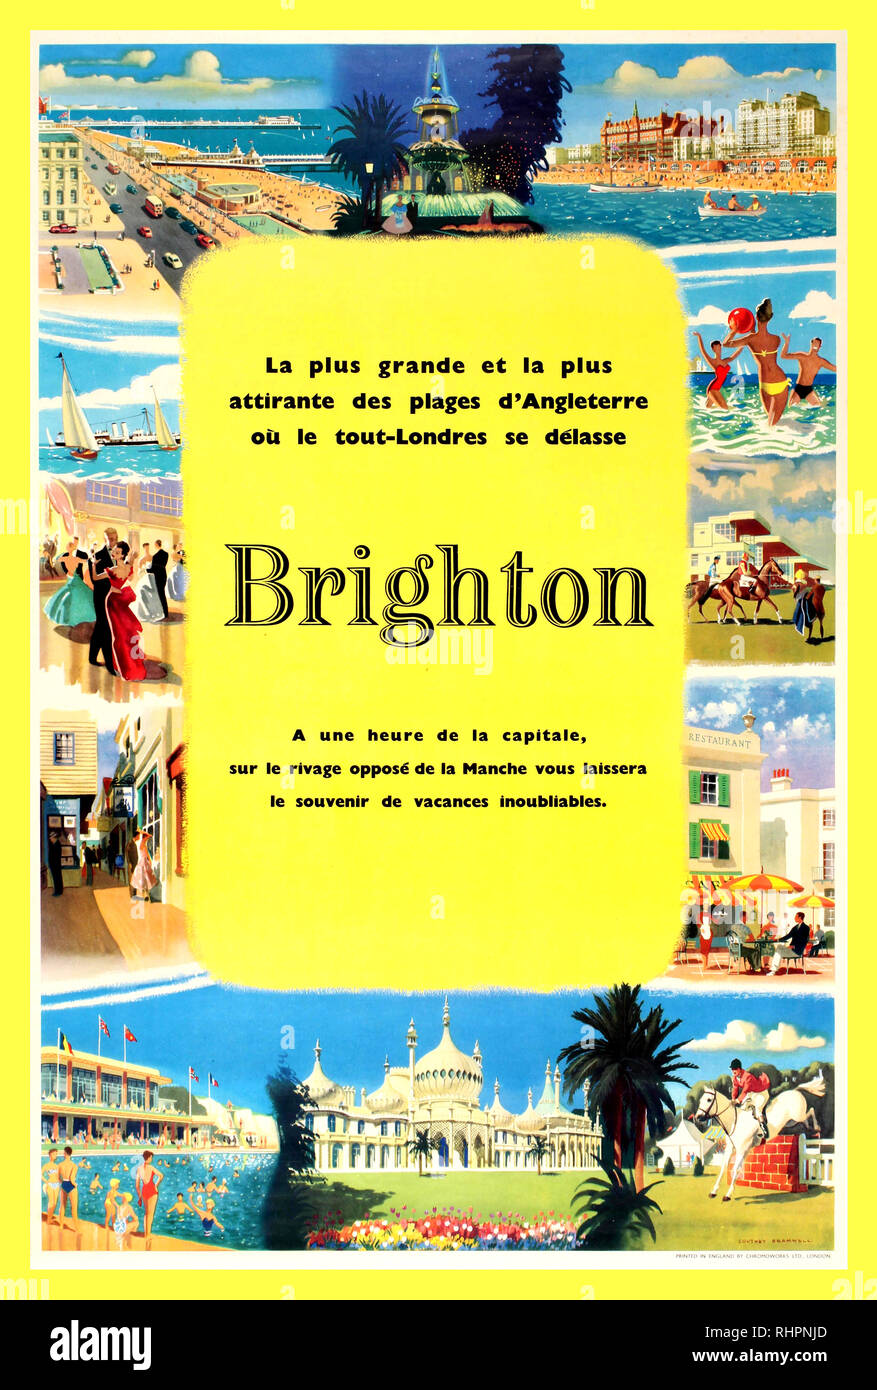 Vintage BRIGHTON 1950’s travel advertising poster in French language to promote the English south coast town of Brighton in France  'where everyone from London goes to enjoy the biggest and best beach of England'. Colourful design  depicting various attractions and activities available to French tourists visiting Brighton, including people playing beach ball in the sea, a view of the beach and seafront buildings along the Promenade, palm trees and flowers, horses, ballroom dancing, sailing and rowing boats, people swimming in an outdoor swimming pool... Stock Photo